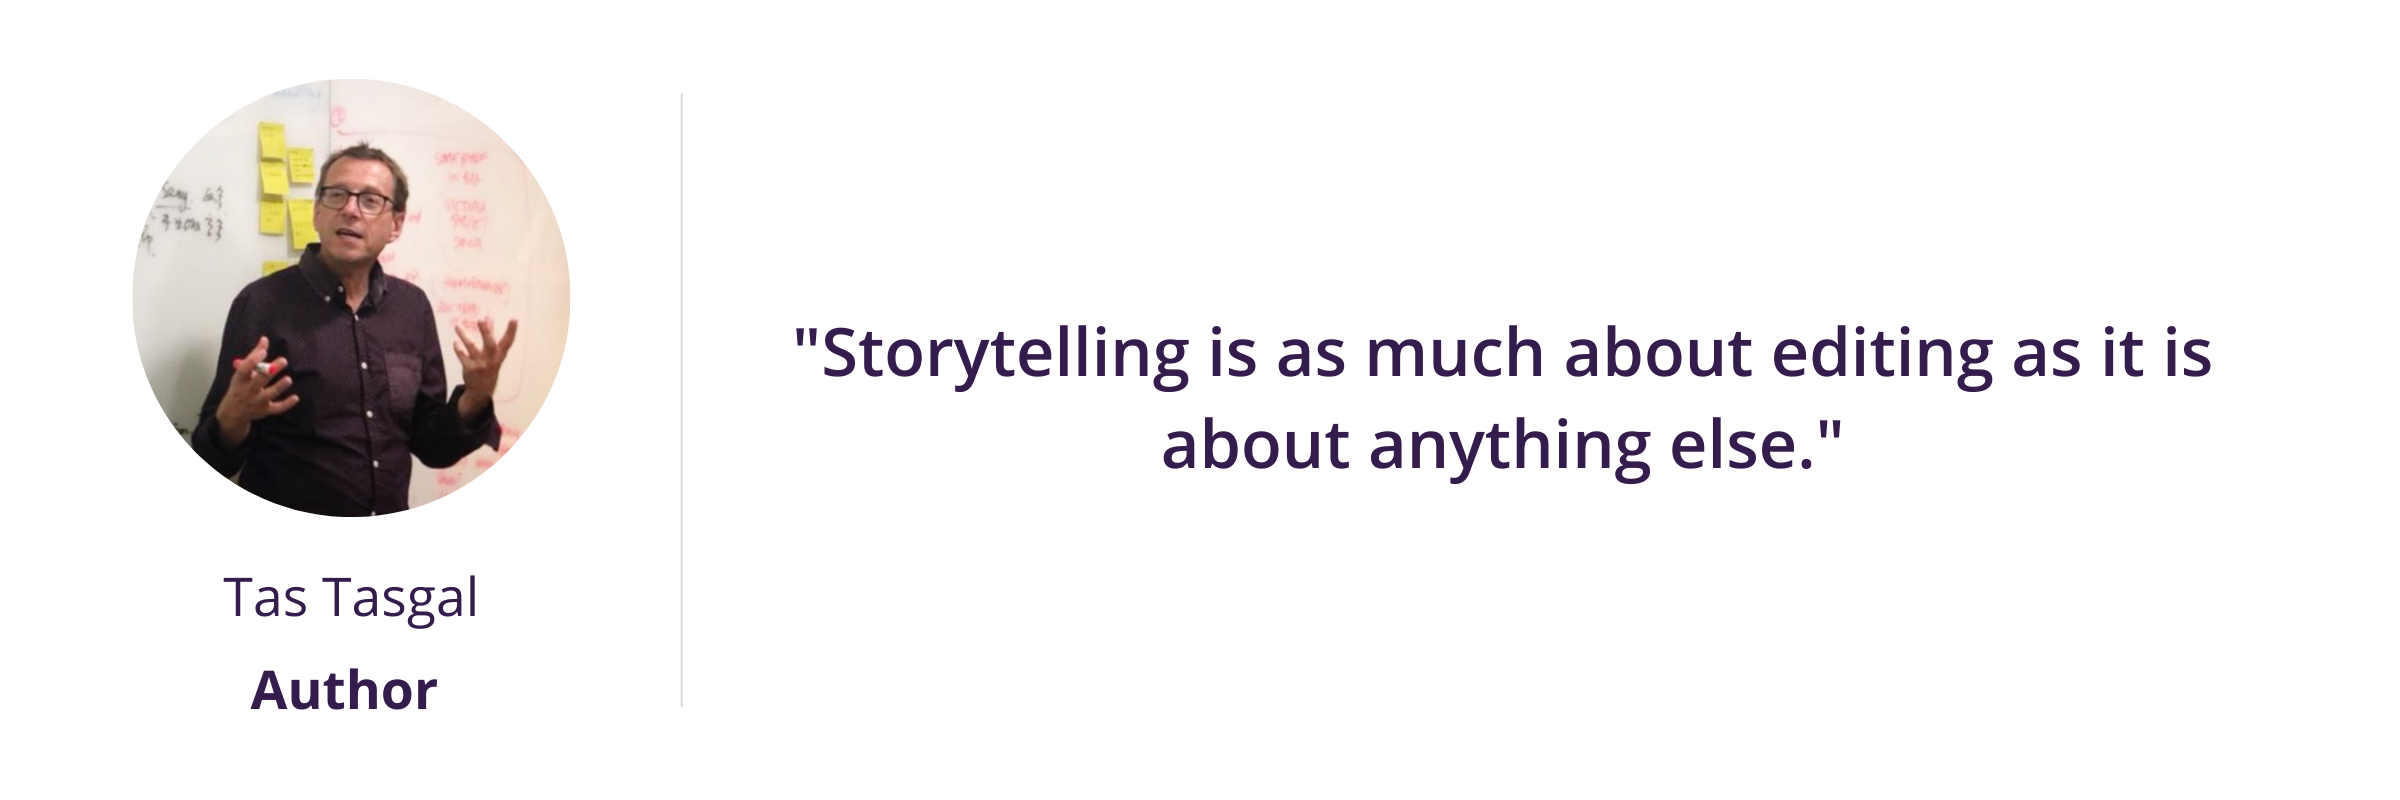 Storytelling is as much about editing as it is about anything else.